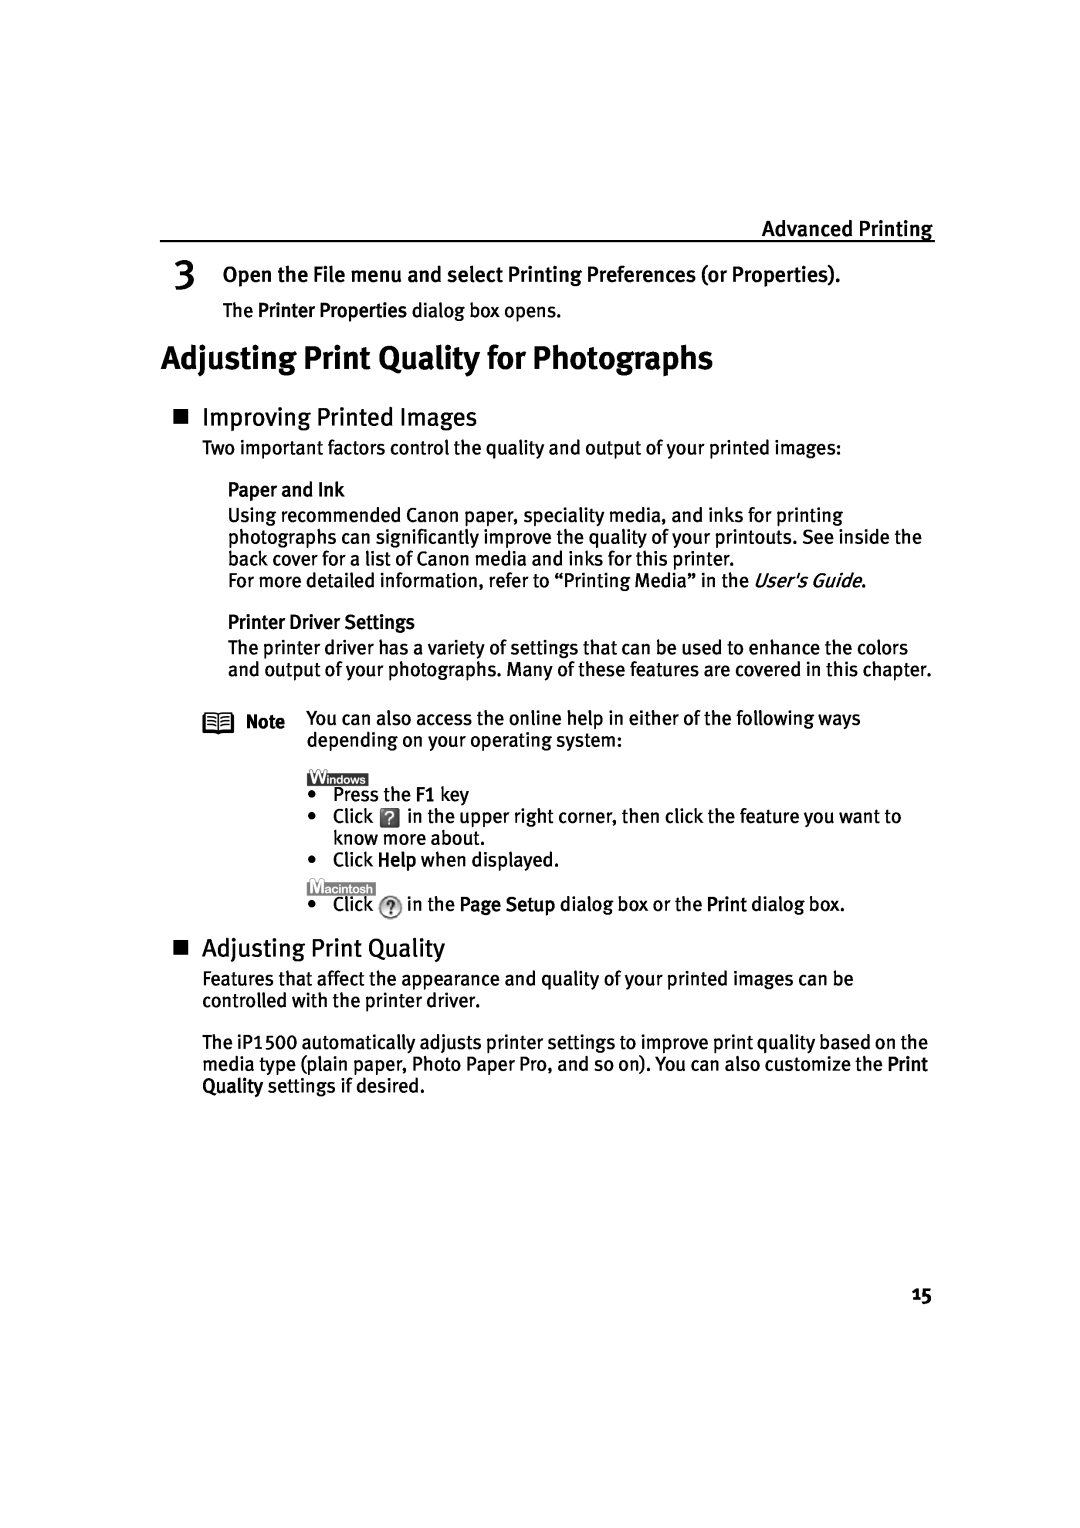 Canon IP1500 quick start Adjusting Print Quality for Photographs, Advanced Printing, Paper and Ink, Printer Driver Settings 